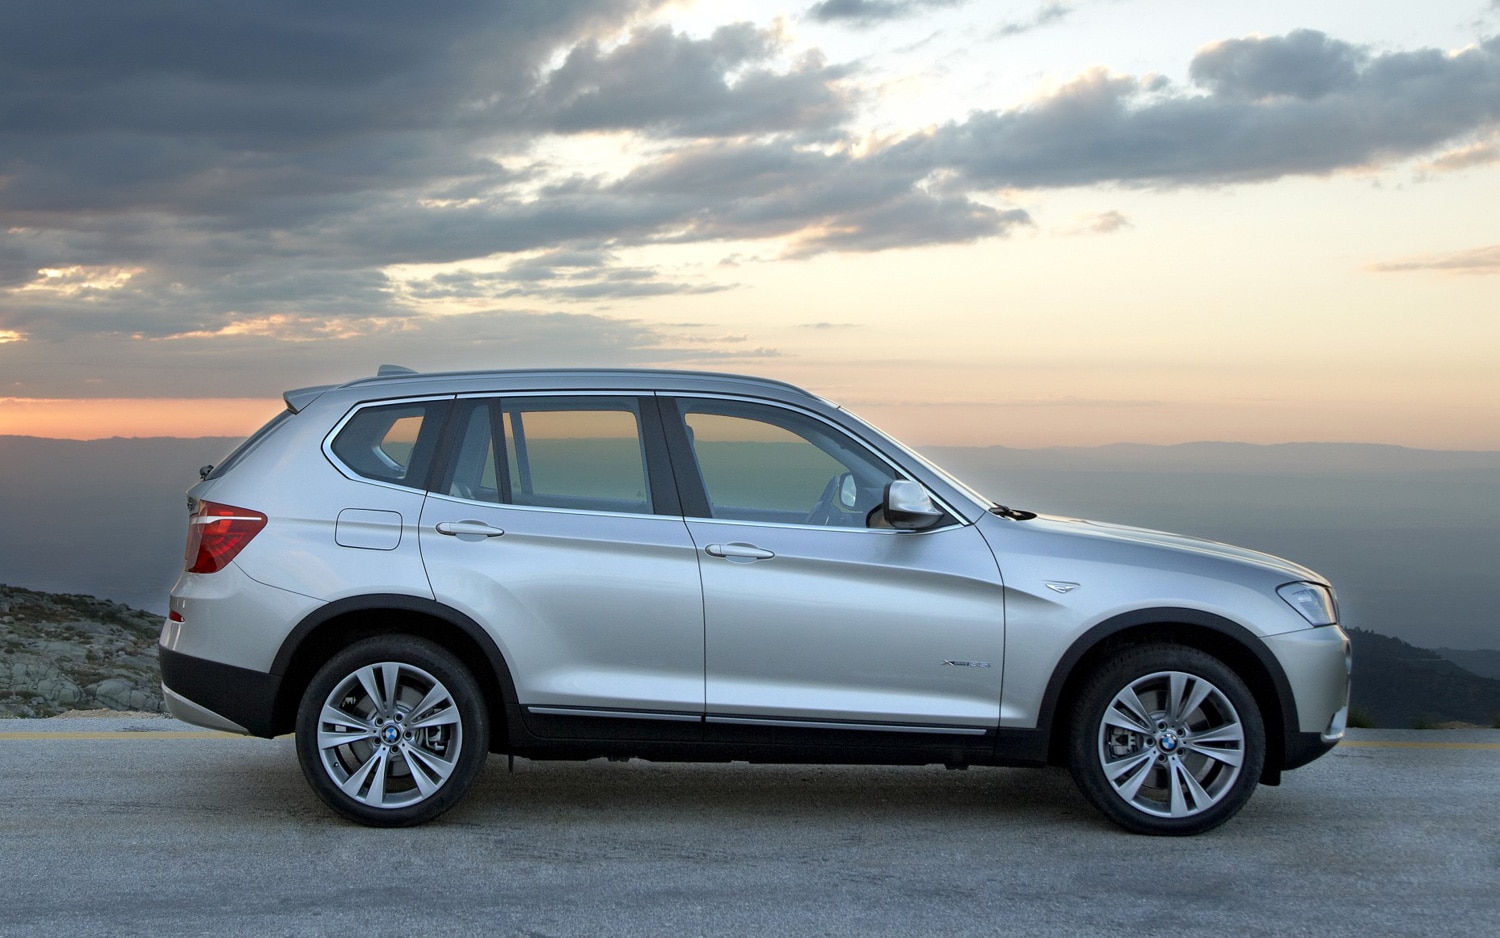 2013 BMW X3 Starts at $37,995 with Four-Cylinder, $43,595 with Turbo-Six